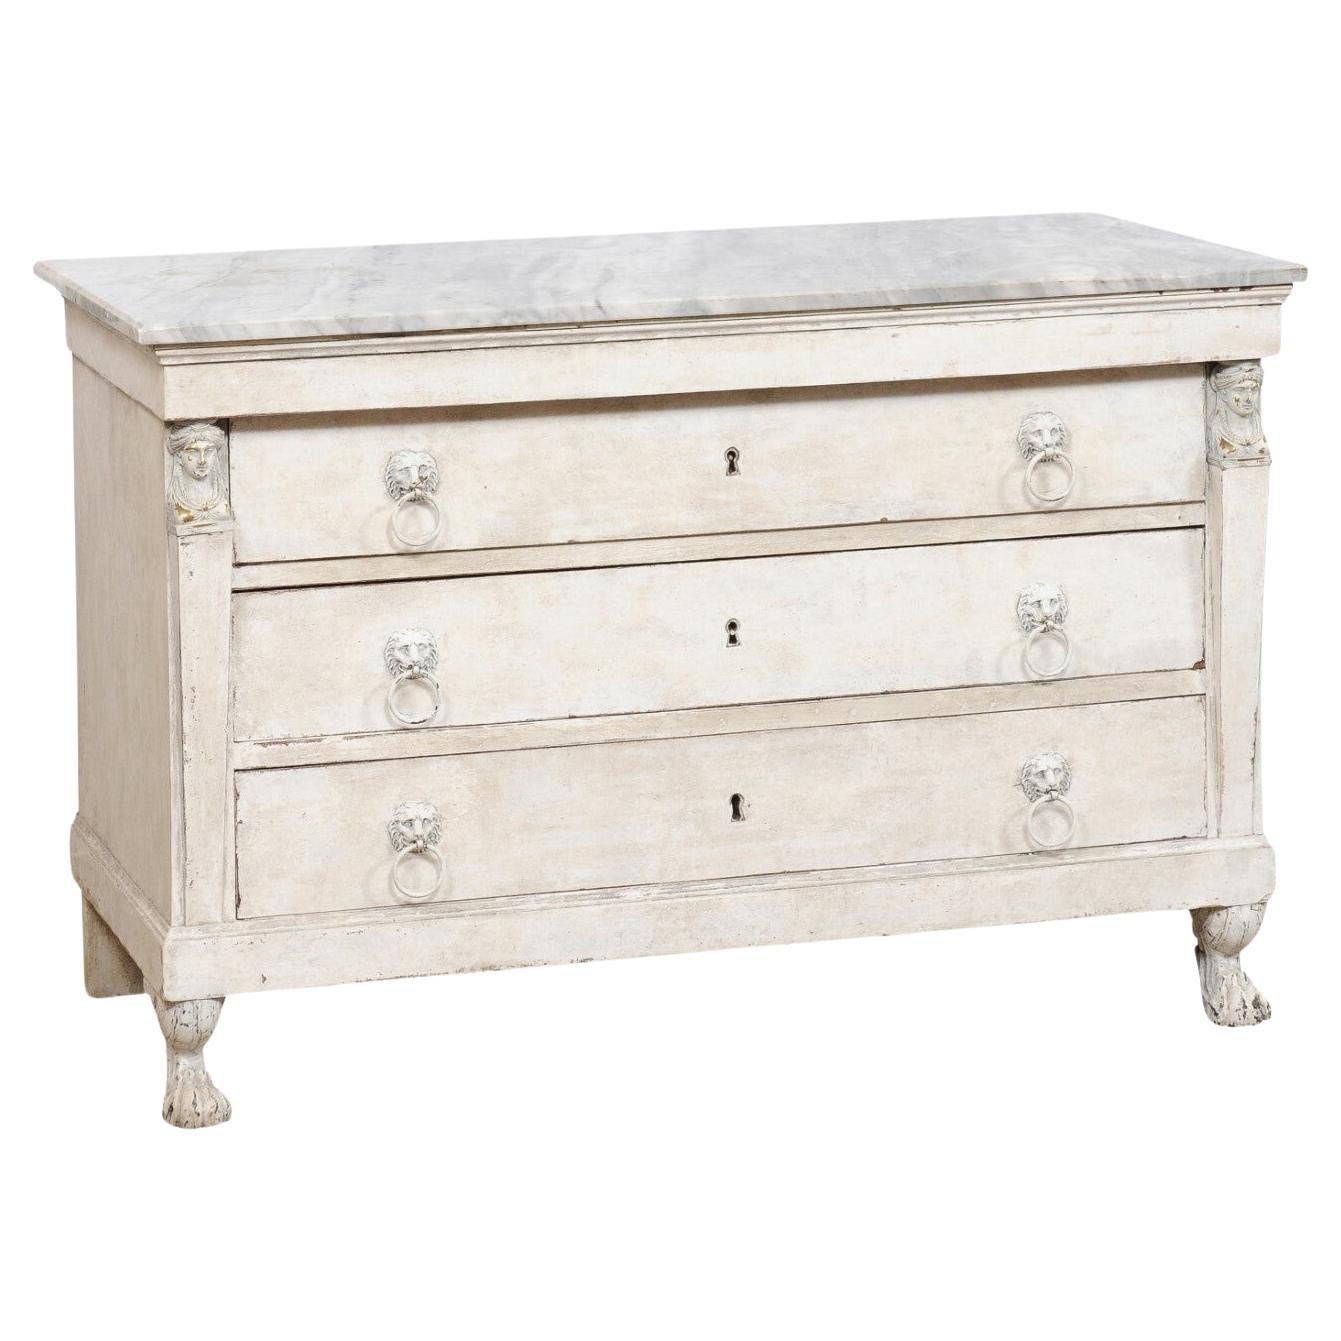 Neoclassic Period French Marble-Top Commode w/Paw Feet & Lion's Head Pulls For Sale